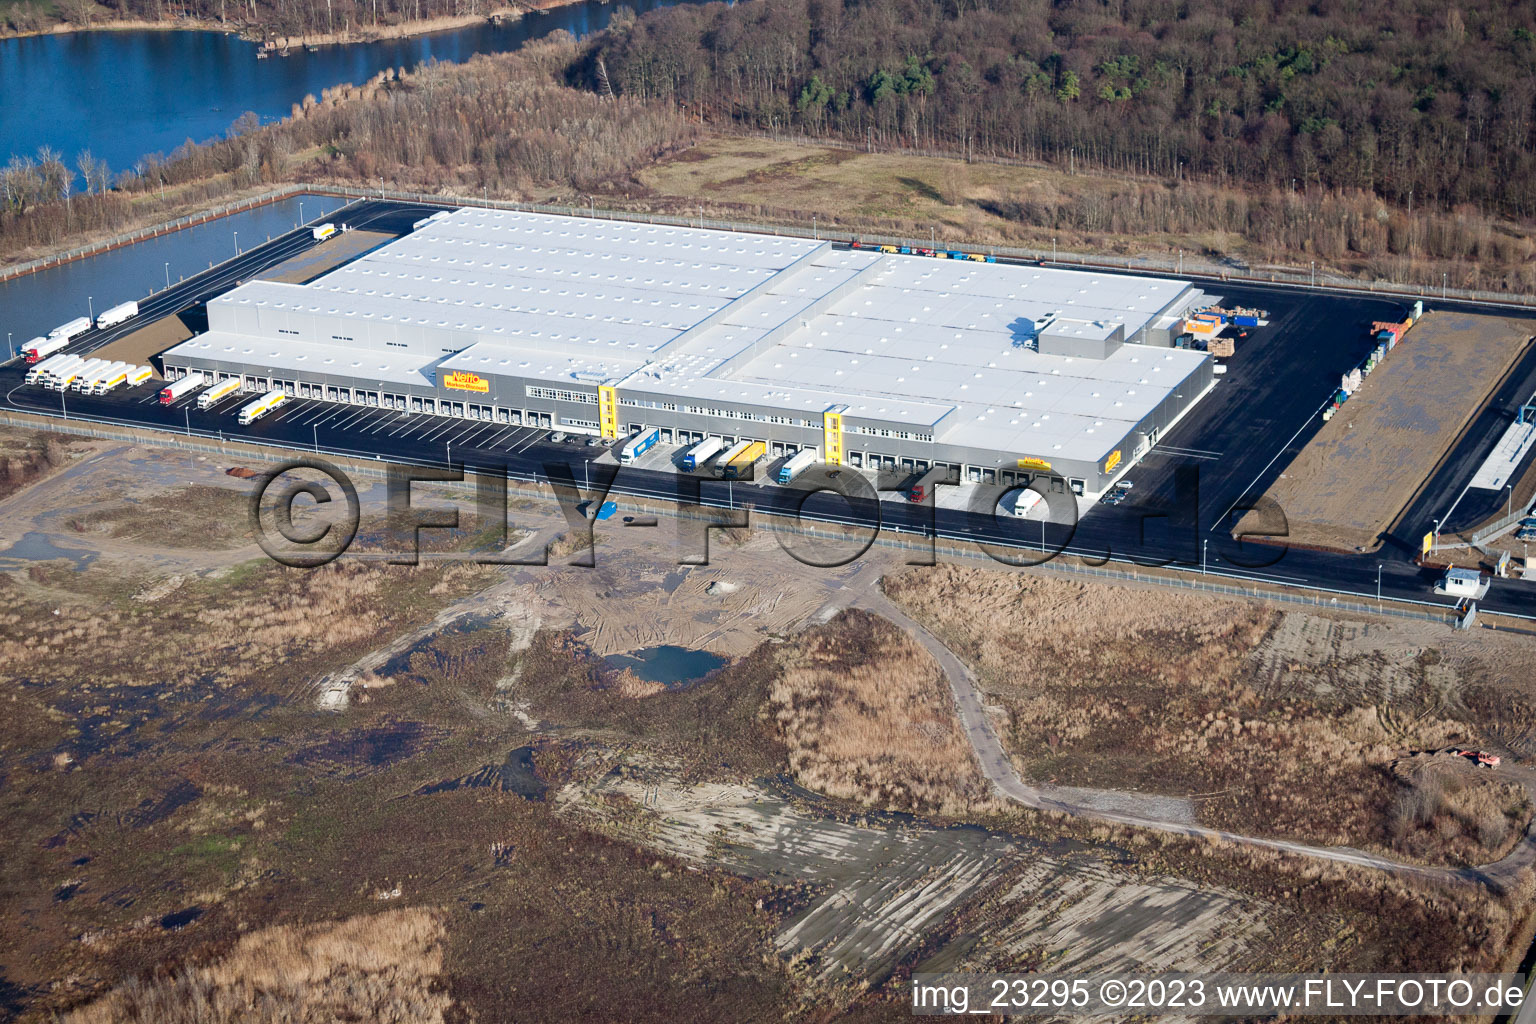 Aerial photograpy of New Netto logistics center in the Oberwald industrial area in Wörth am Rhein in the state Rhineland-Palatinate, Germany